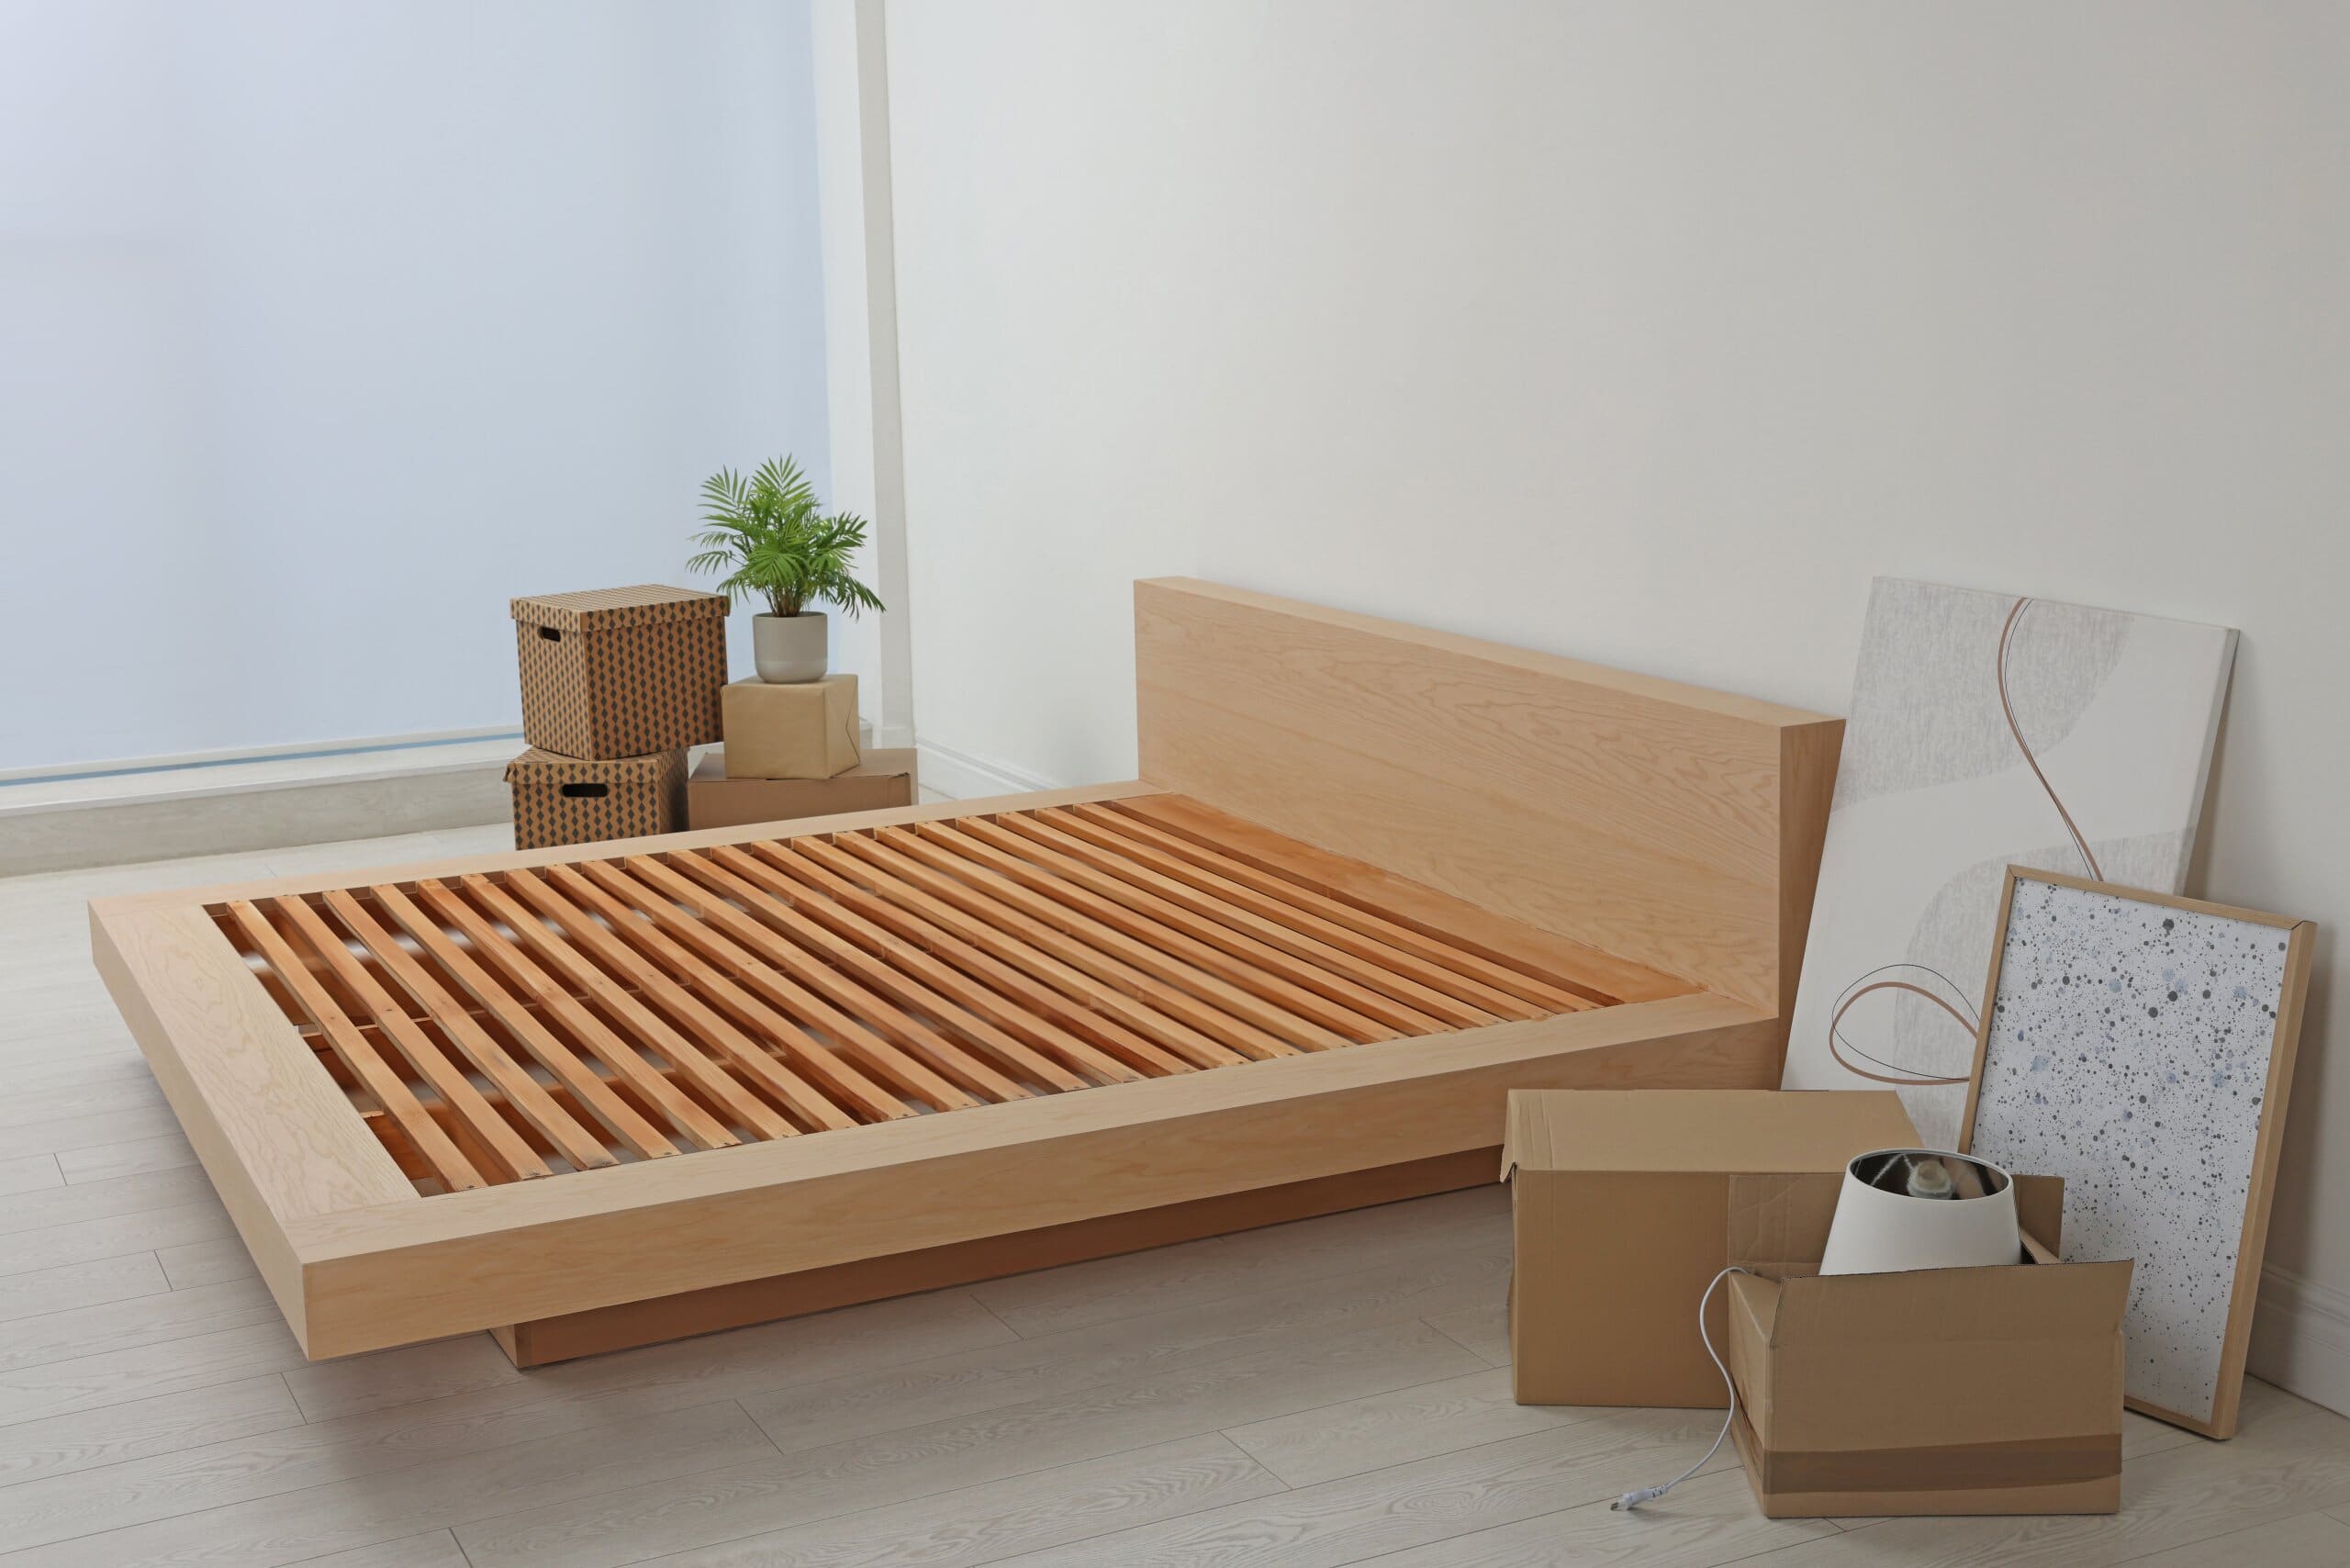 New wooden bed frame, moving boxes and decor elements indoors.